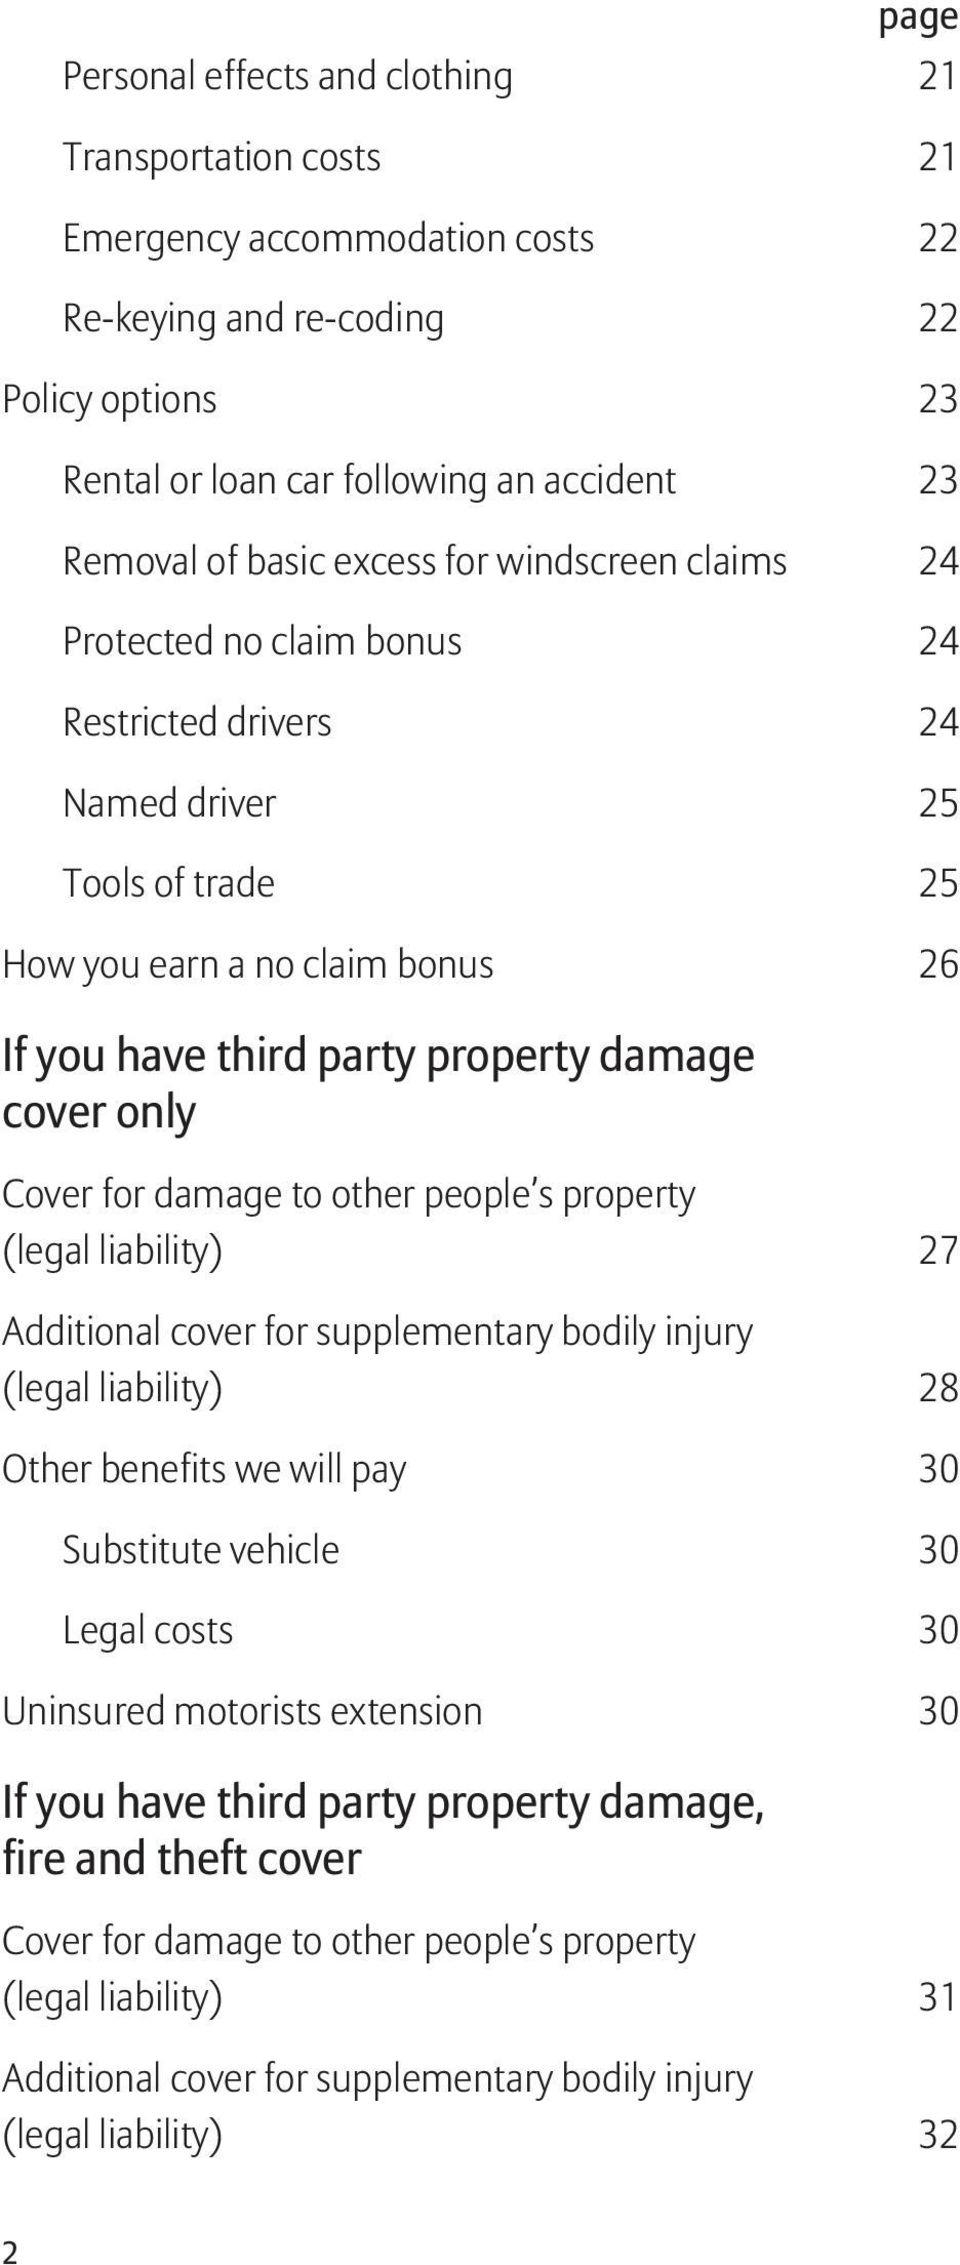 Cover for damage to other people s property (legal liability) 27 Additional cover for supplementary bodily injury (legal liability) 28 Other benefits we will pay 30 Substitute vehicle 30 Legal costs